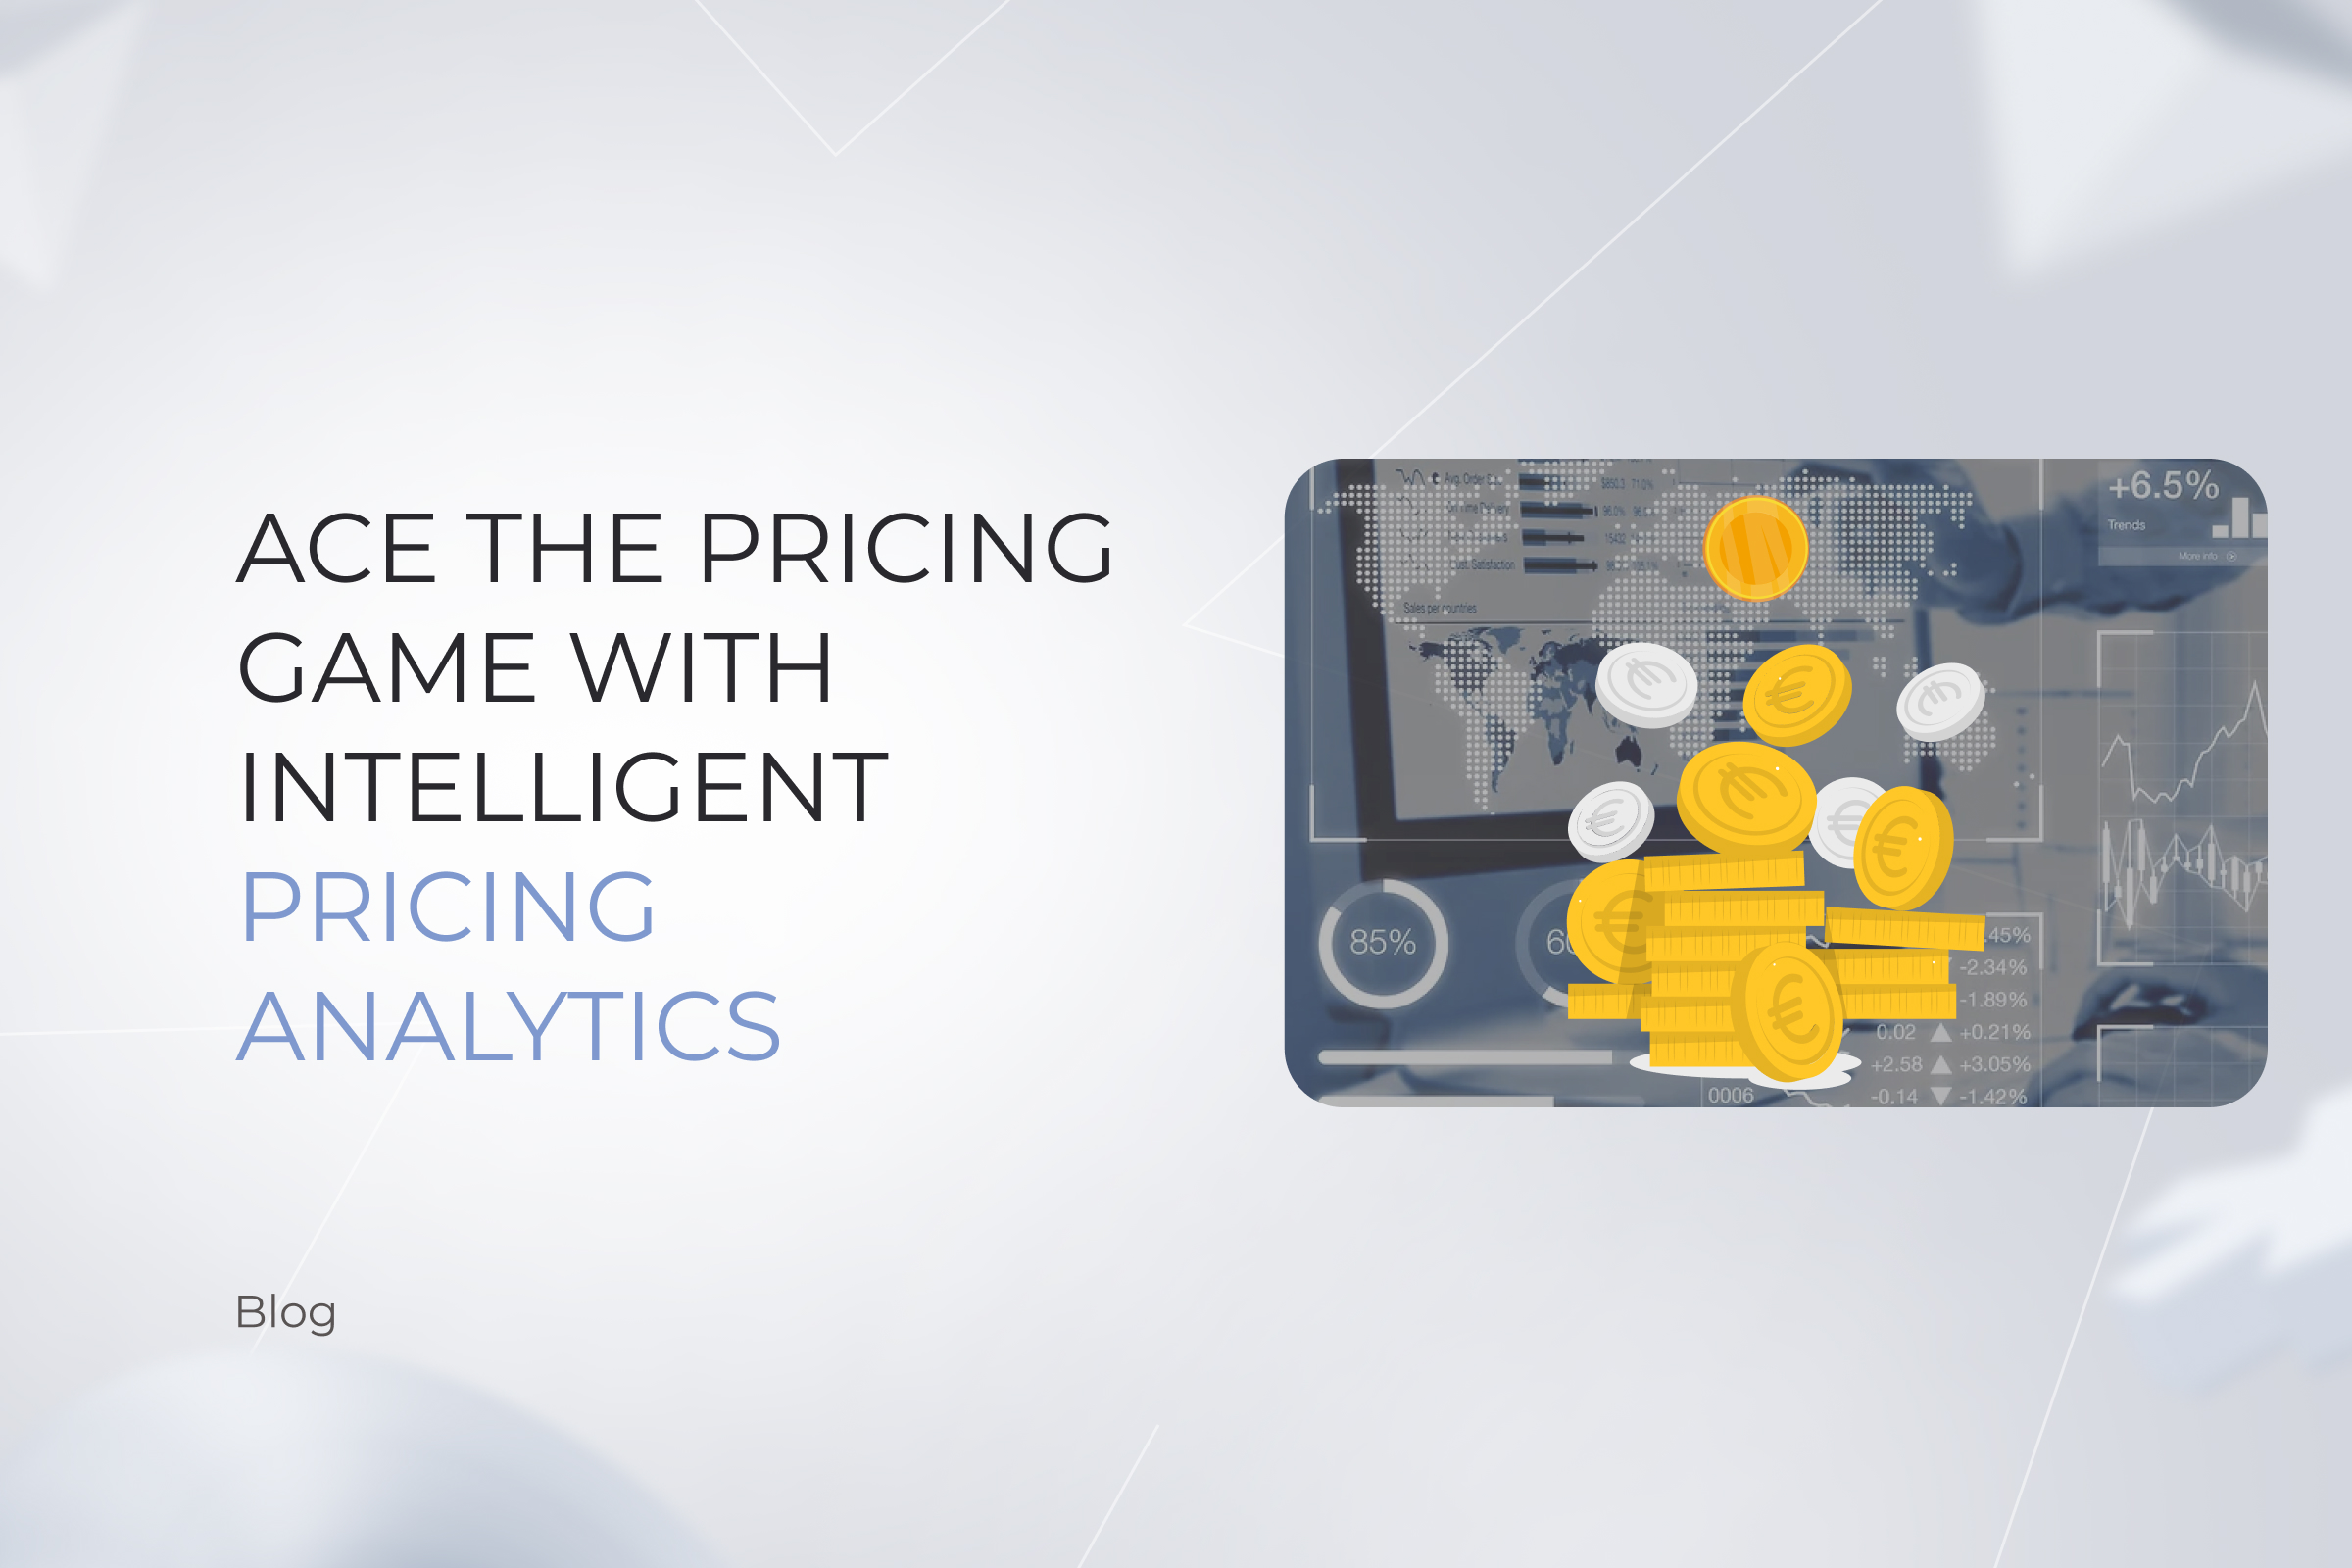 Ace the pricing game with intelligent pricing analytics